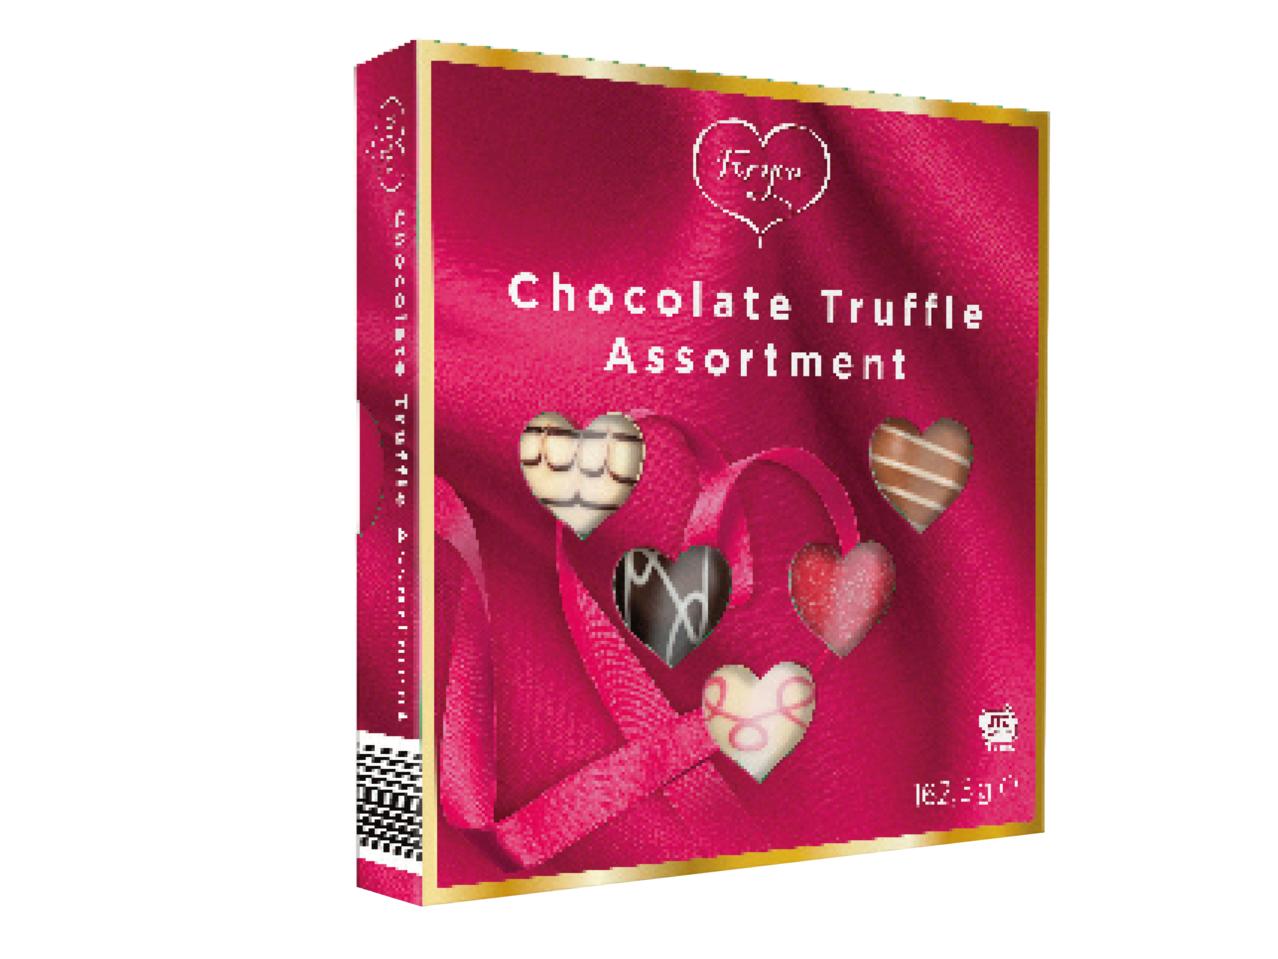 FOR YOU(R) Chocolate Truffle Assortment